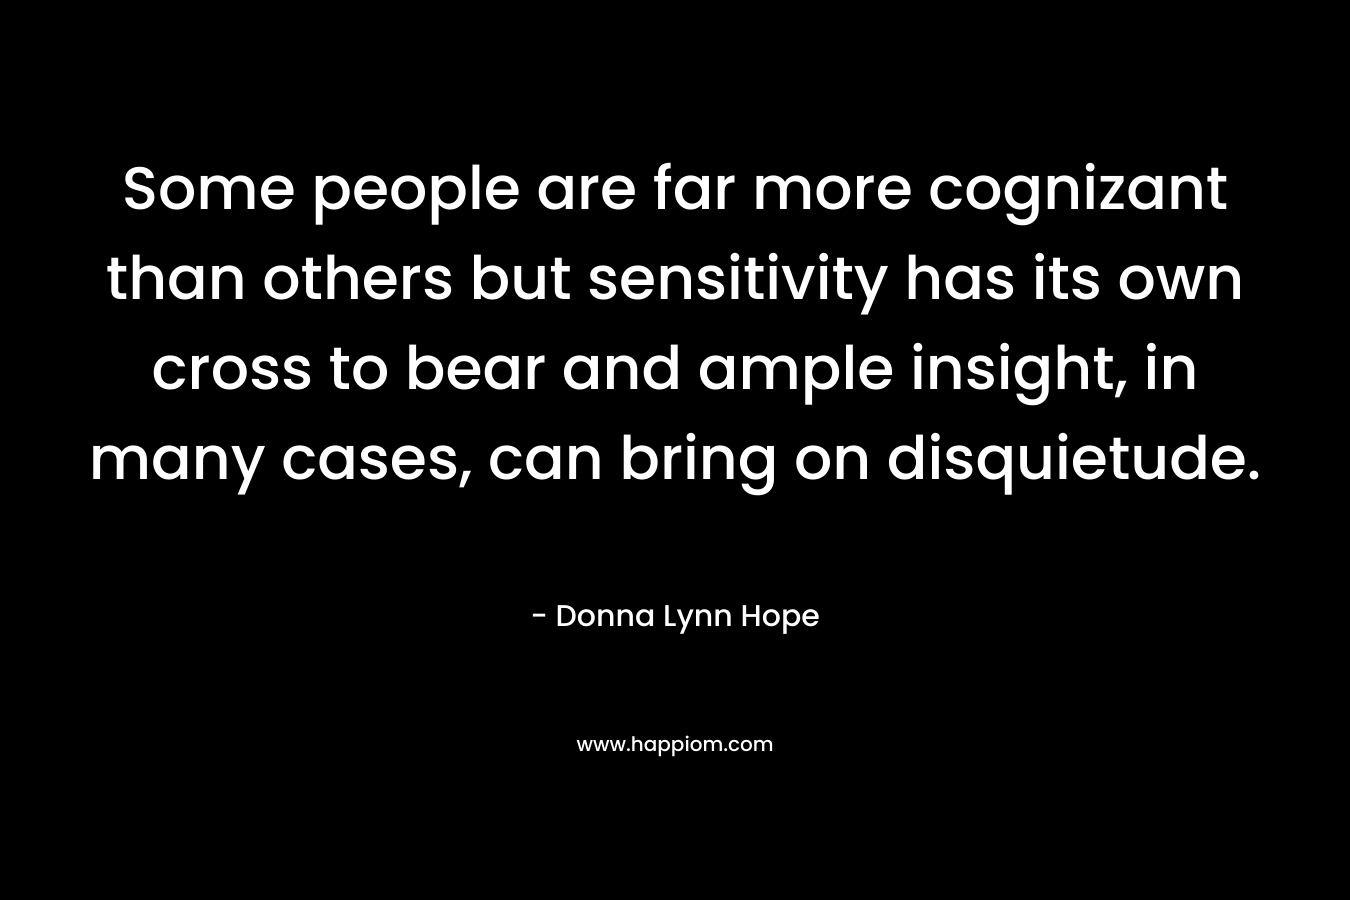 Some people are far more cognizant than others but sensitivity has its own cross to bear and ample insight, in many cases, can bring on disquietude. – Donna Lynn Hope